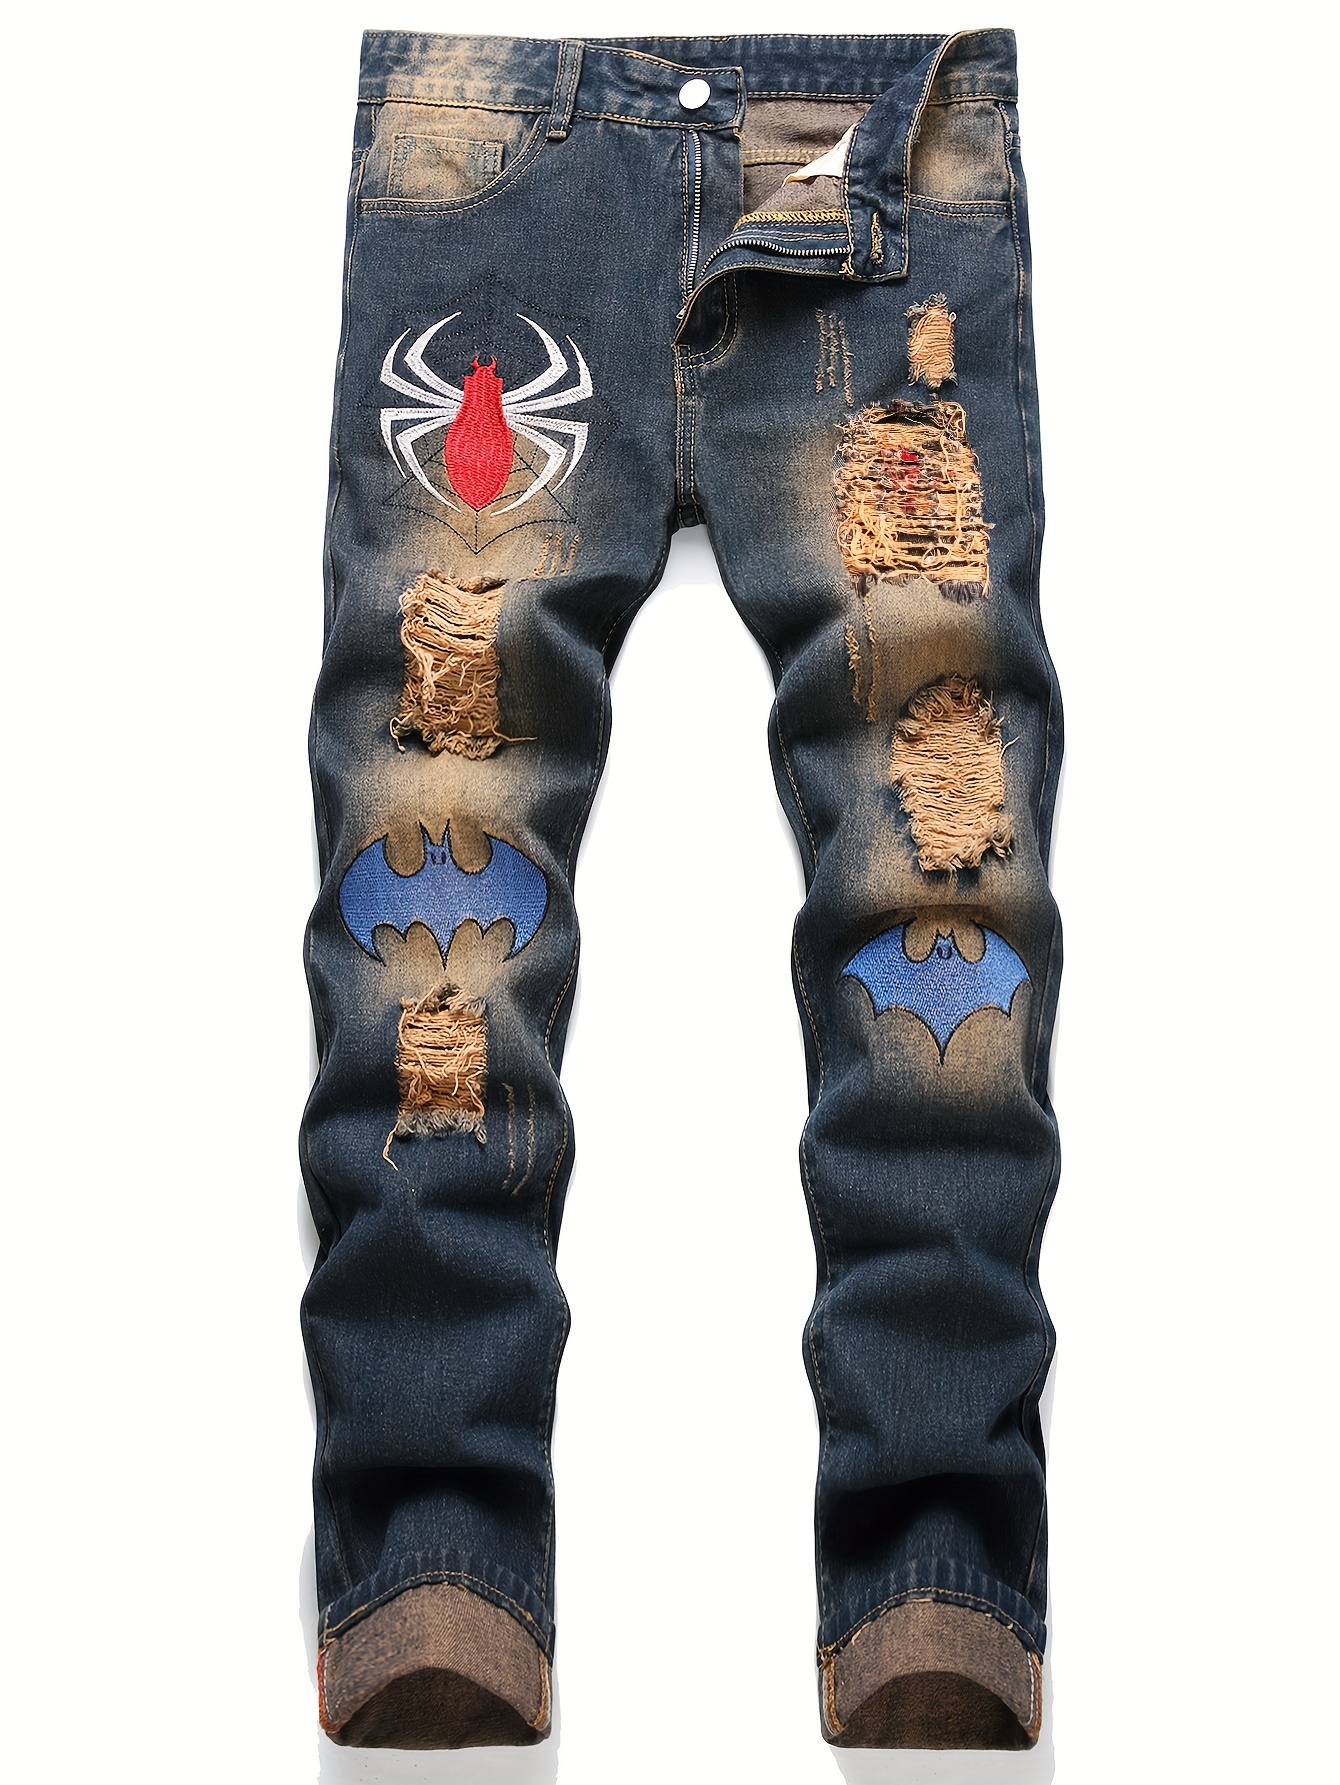 Y2k Distressed Star Pattern Jeans, Men's Halloween Casual Street Style  Loose Fit Denim Pants For The Four Seasons